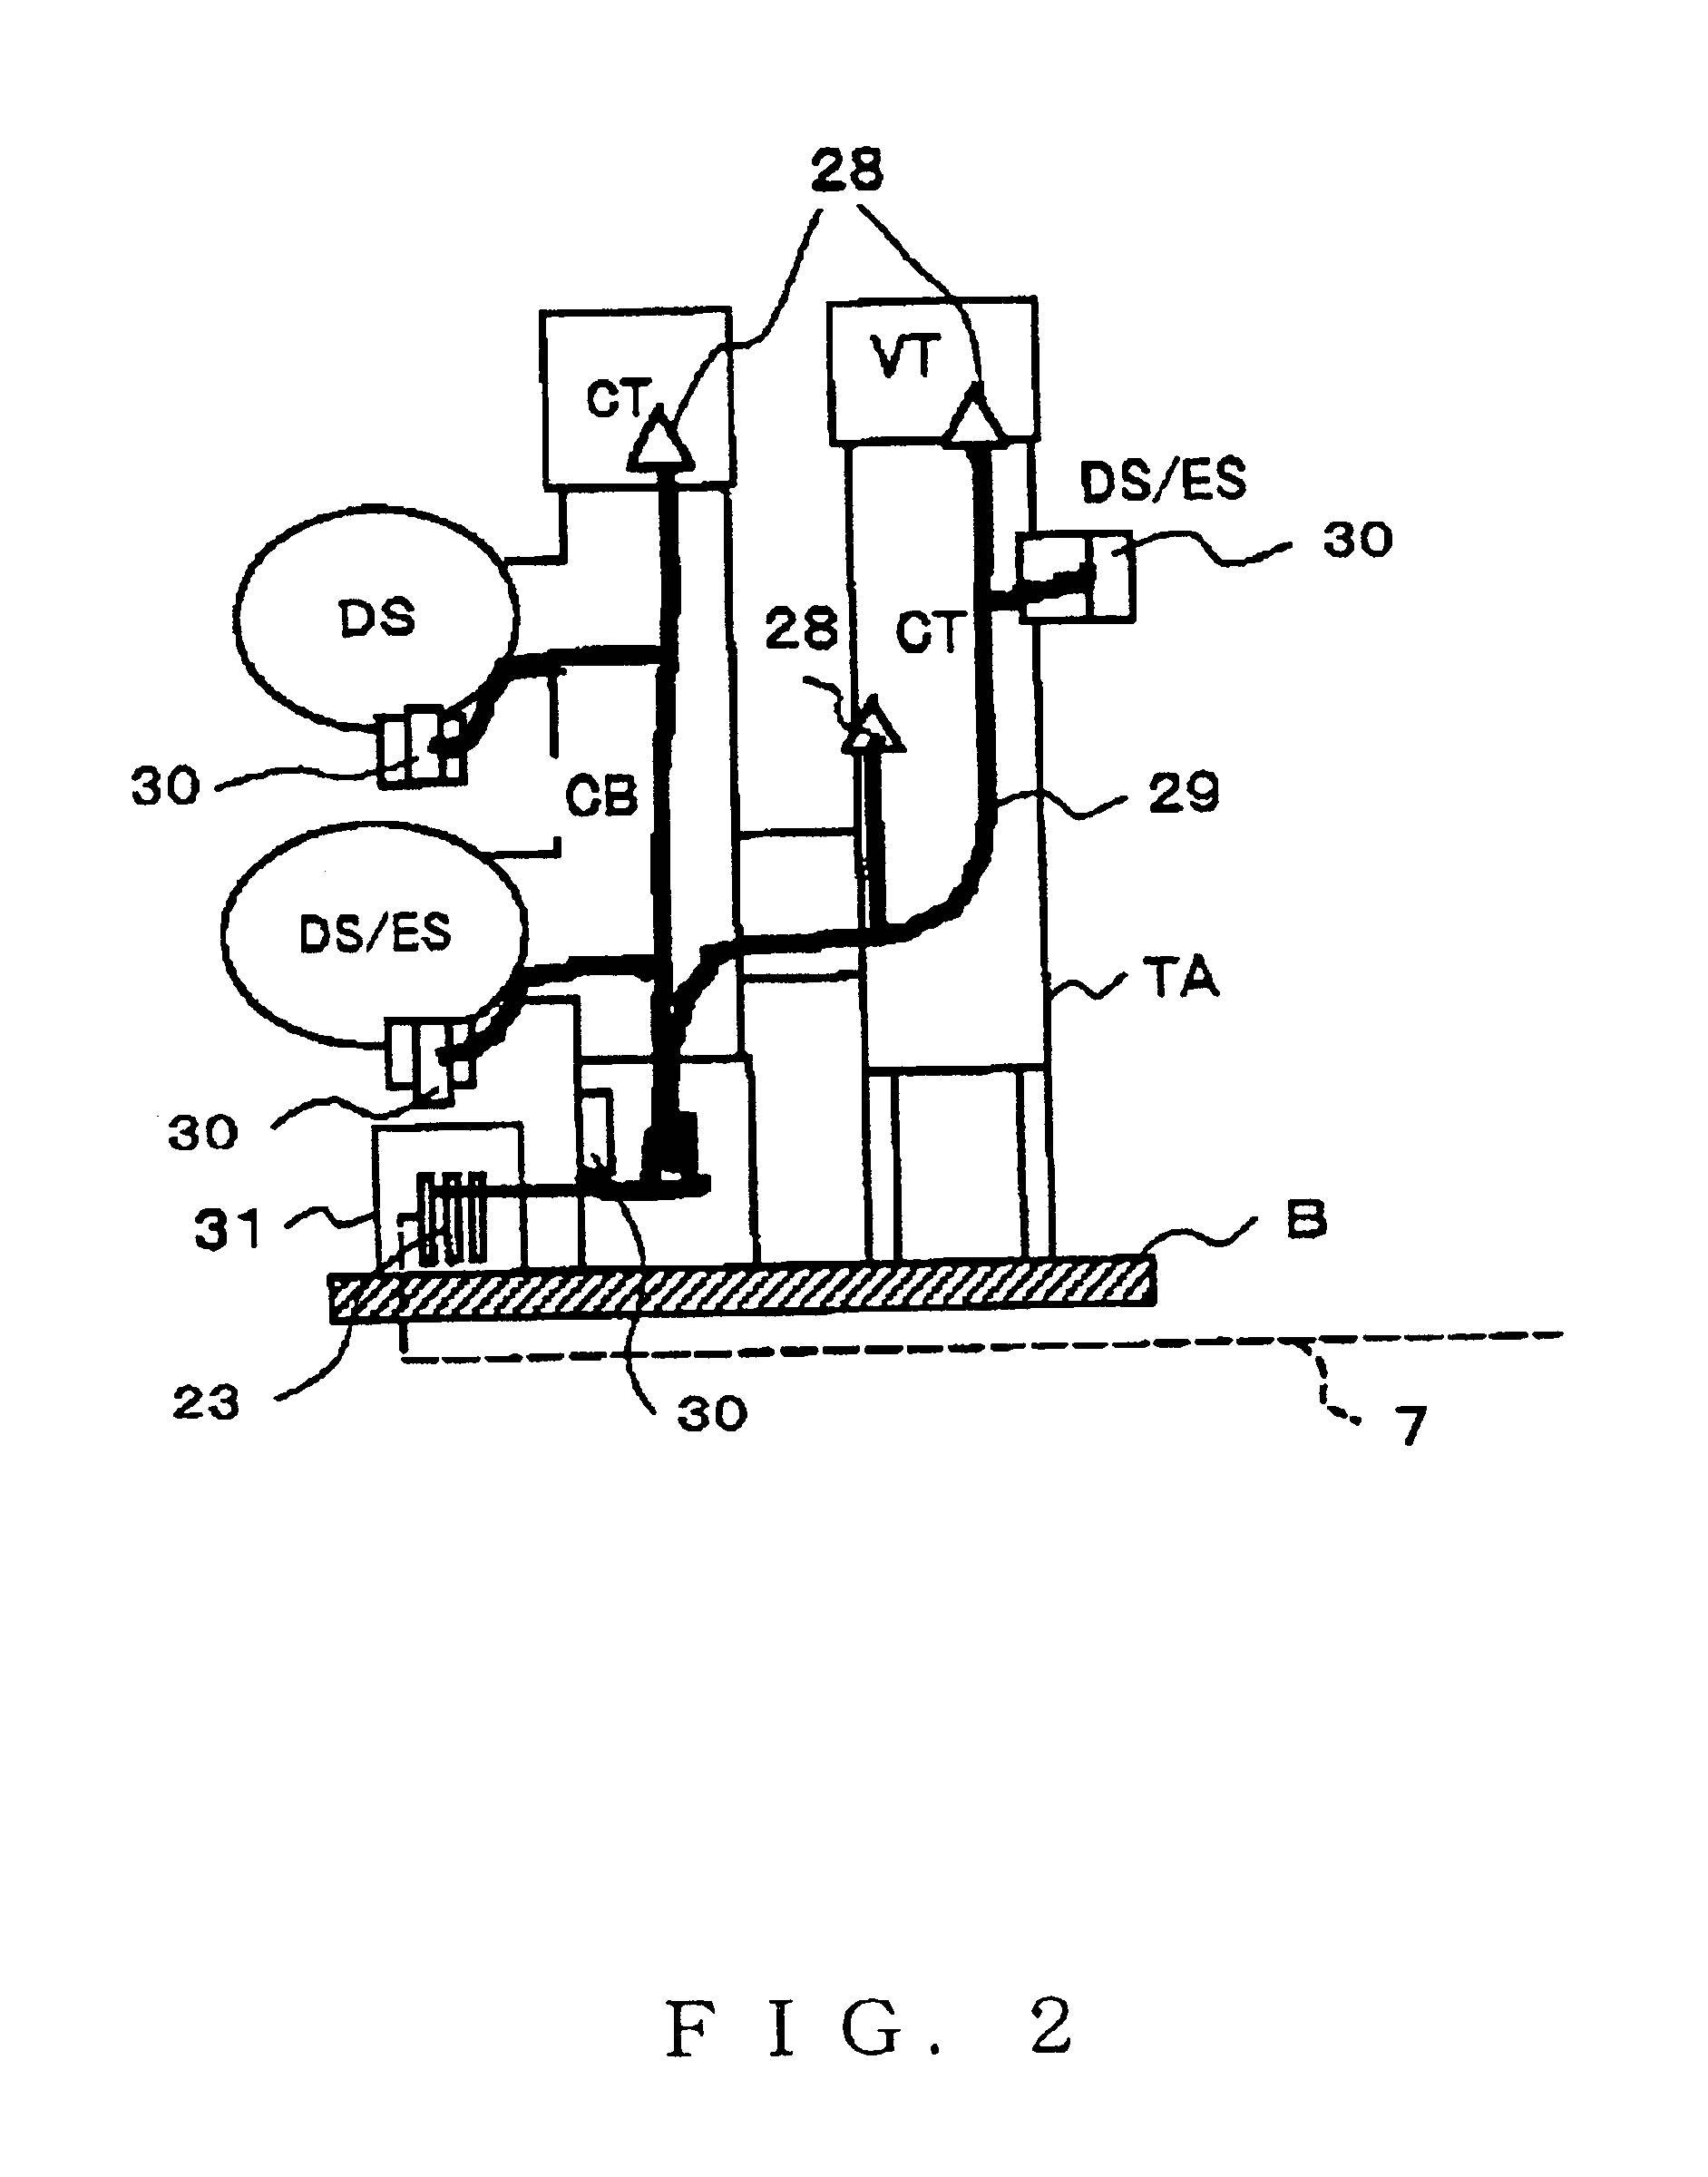 System for protecting and controlling substation main circuit components